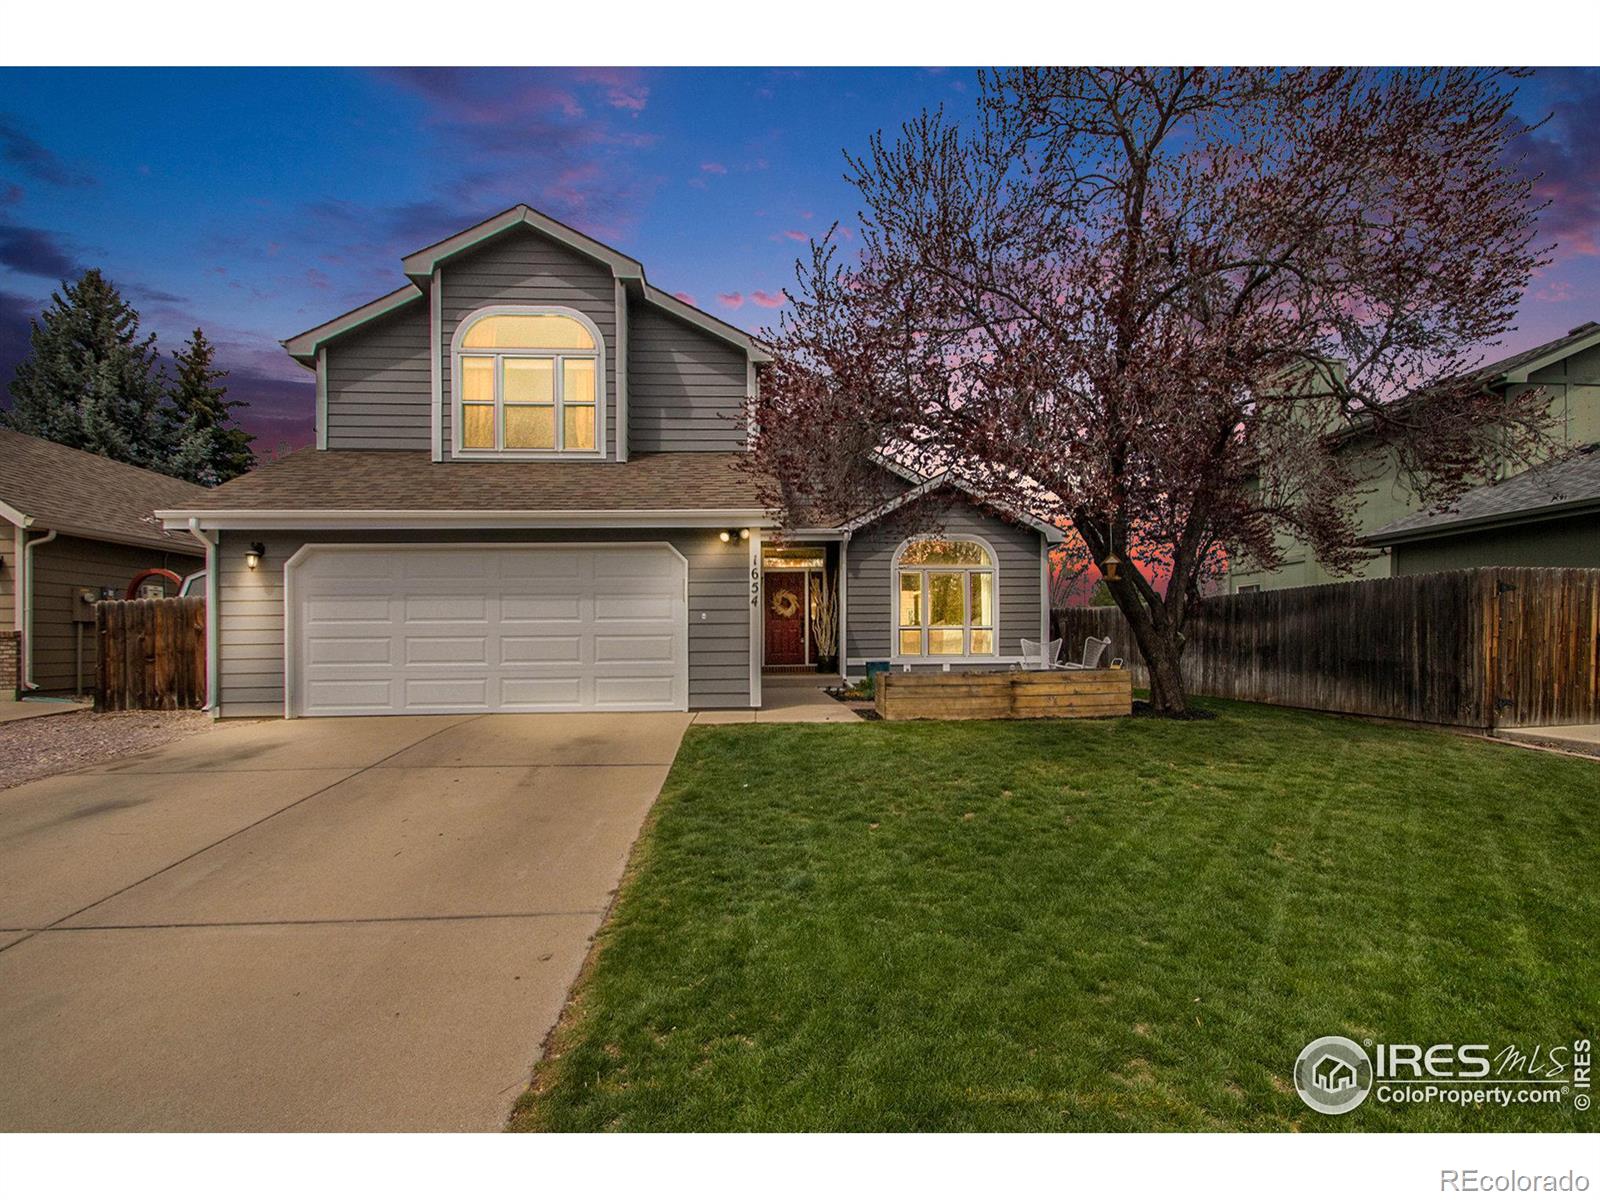 1654  Dogwood Court, fort collins MLS: 4567891008253 Beds: 4 Baths: 4 Price: $685,000